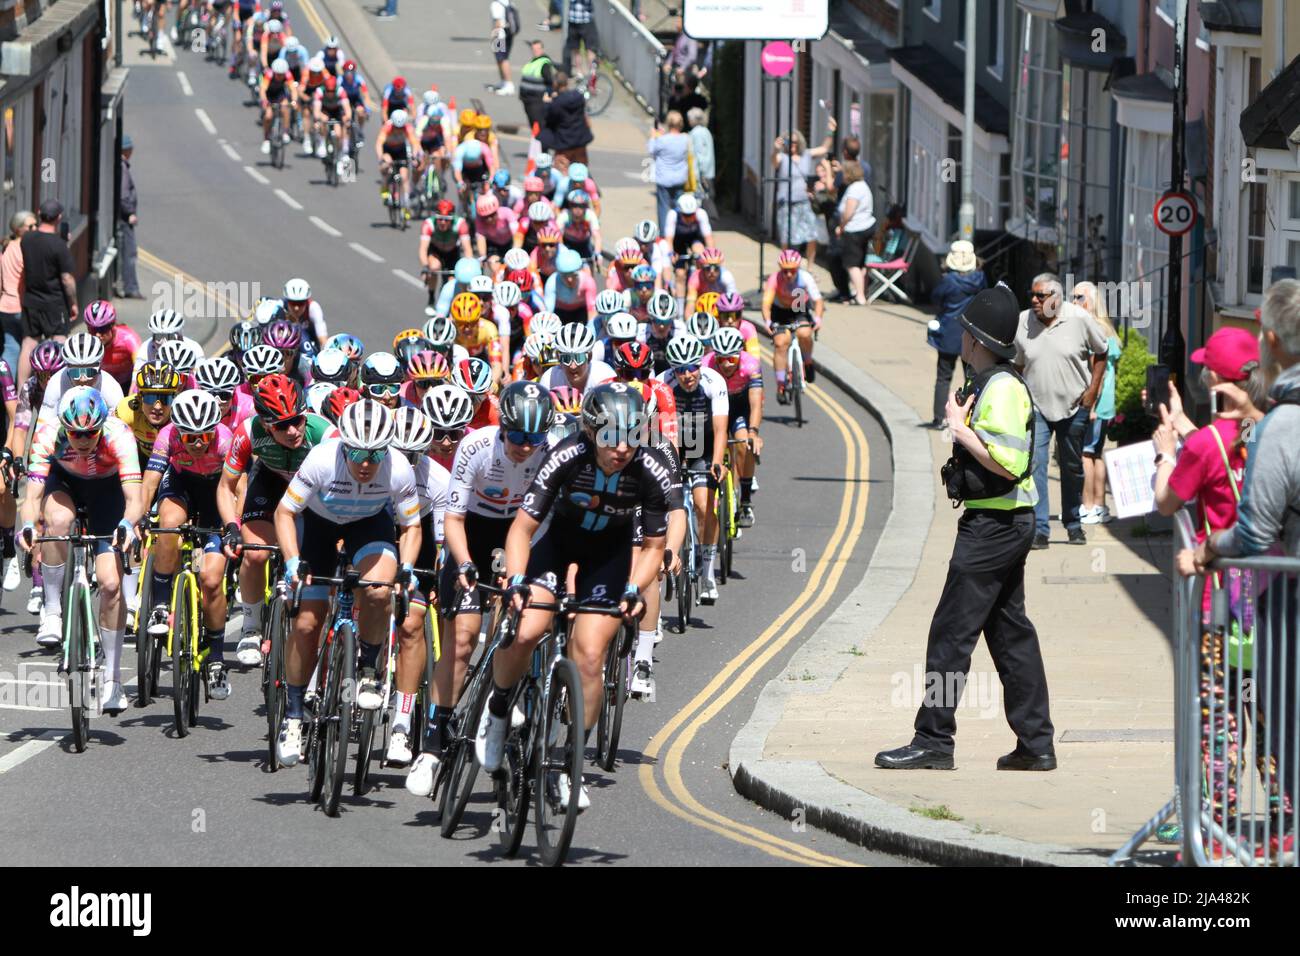 Maldon, UK. 27th May 2022. Stage one of the RideLondon Classique 2022 women's cycle race, part of the UCI Women’s World Tour calendar. The peloton is strung out as they climb up Market Hill in Maldon, Essex. Credit: Eastern Views/Alamy Live News Stock Photo